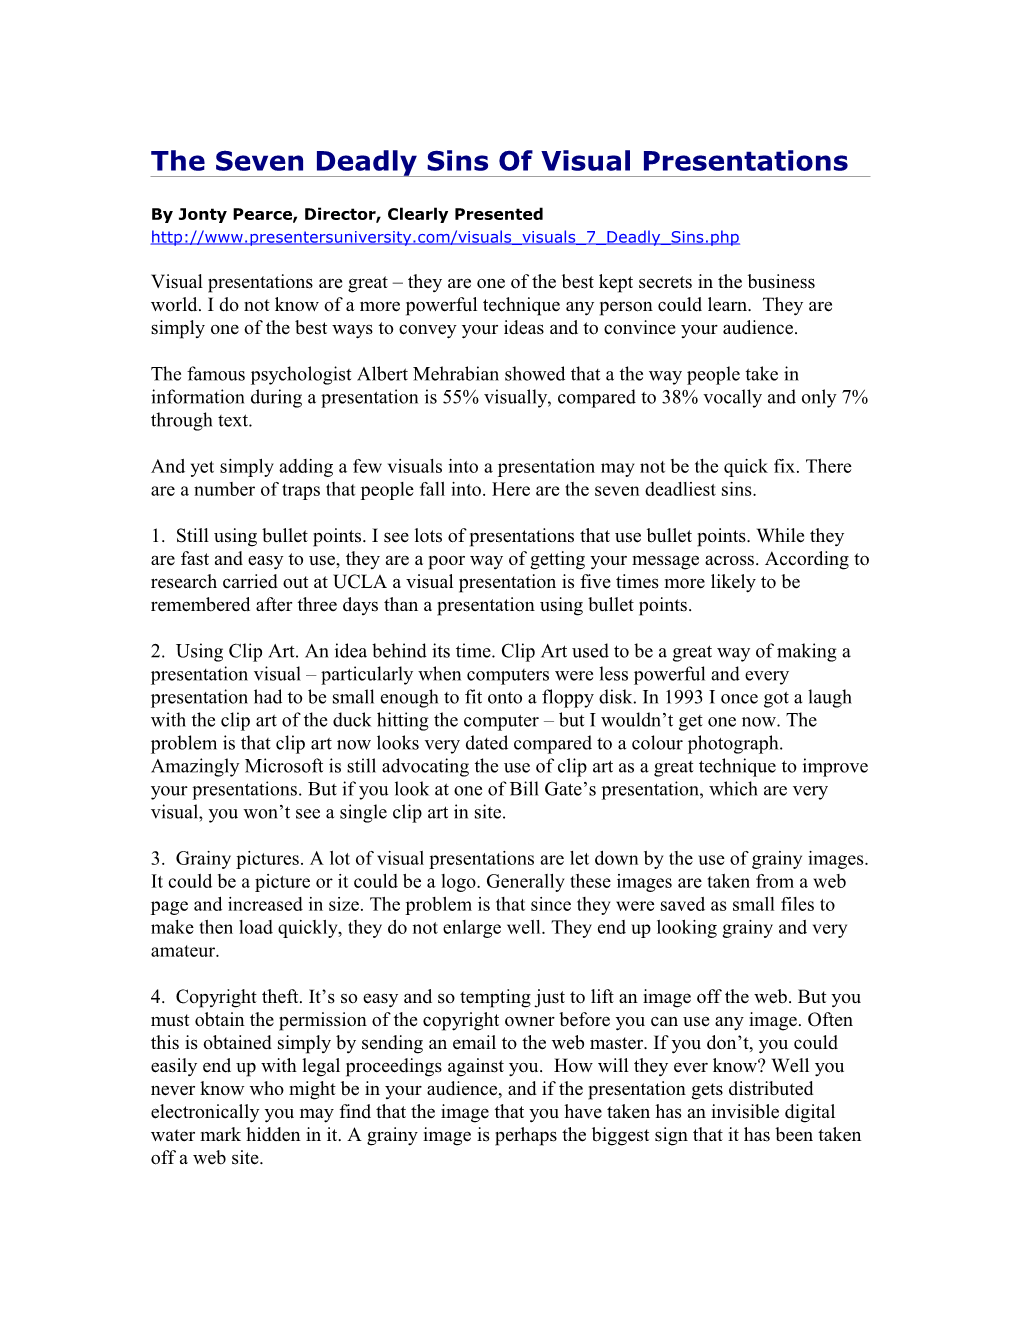 The Seven Deadly Sins of Visual Presentations